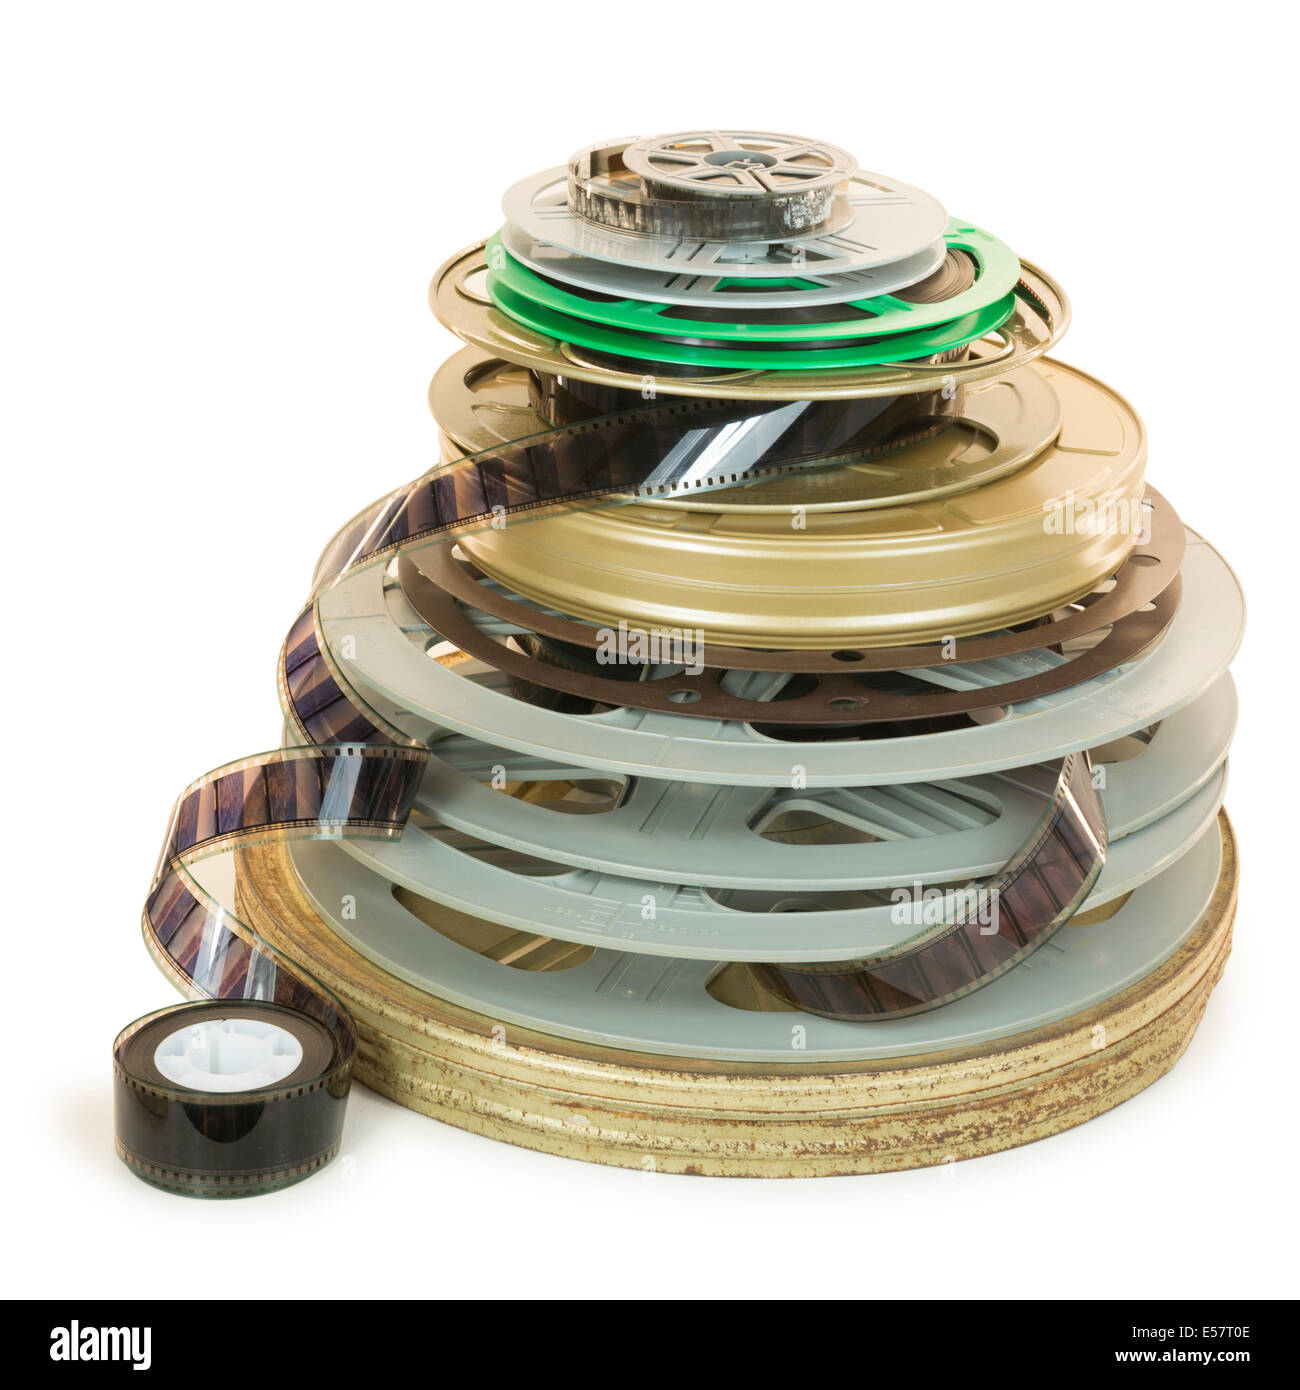 https://c8.alamy.com/comp/E57T0E/pile-of-several-types-of-movie-film-reels-35mm-16mm-8mm-and-two-cans-E57T0E.jpg